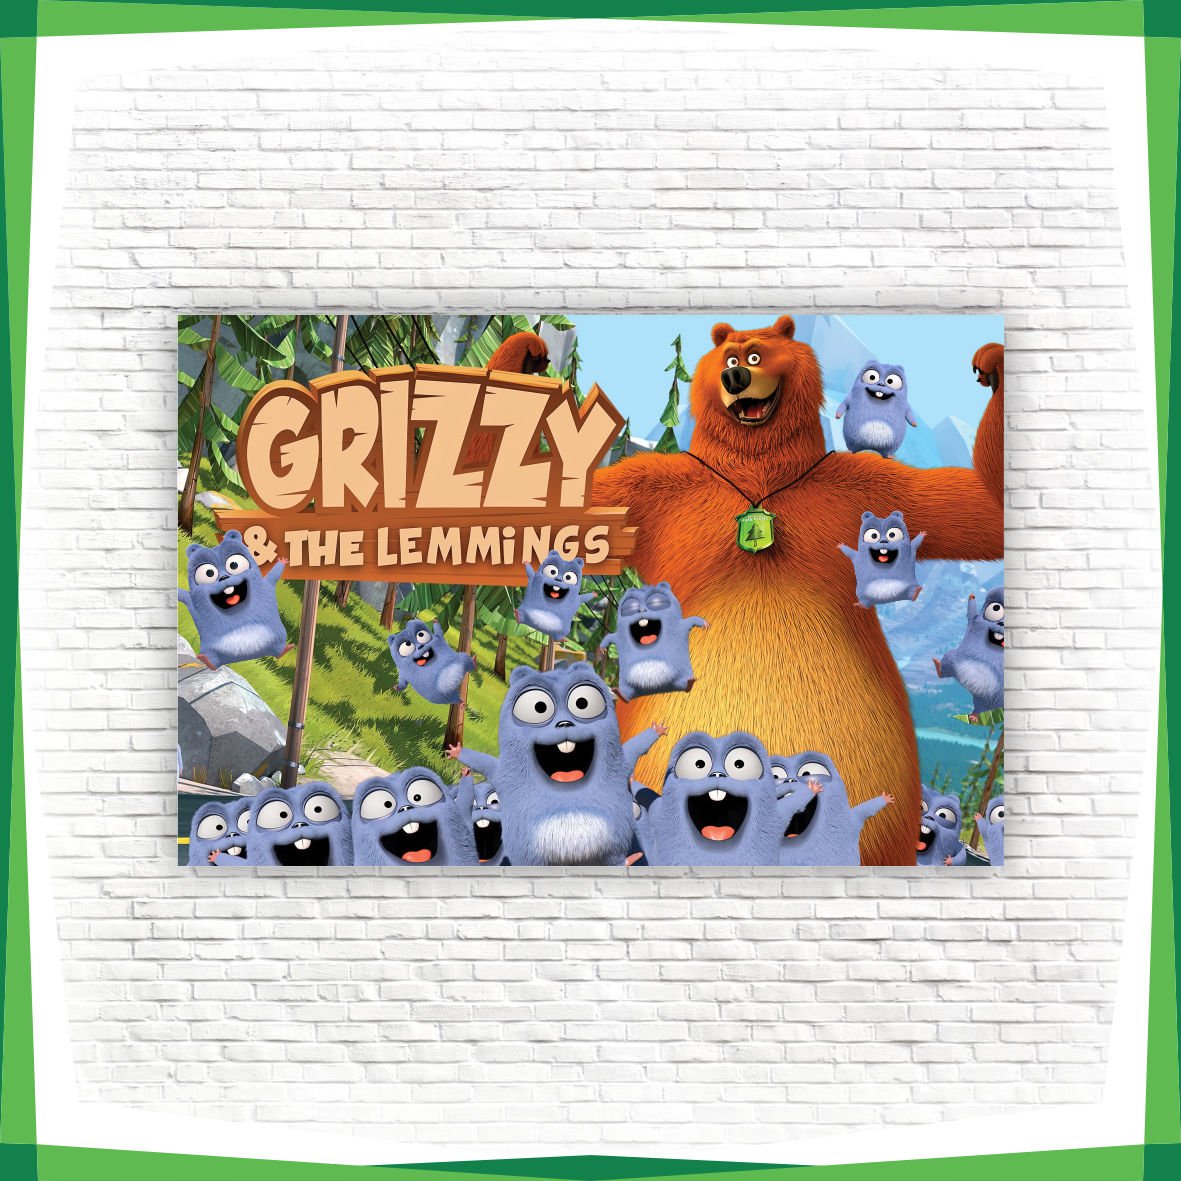 Grizzy e os Lemmings